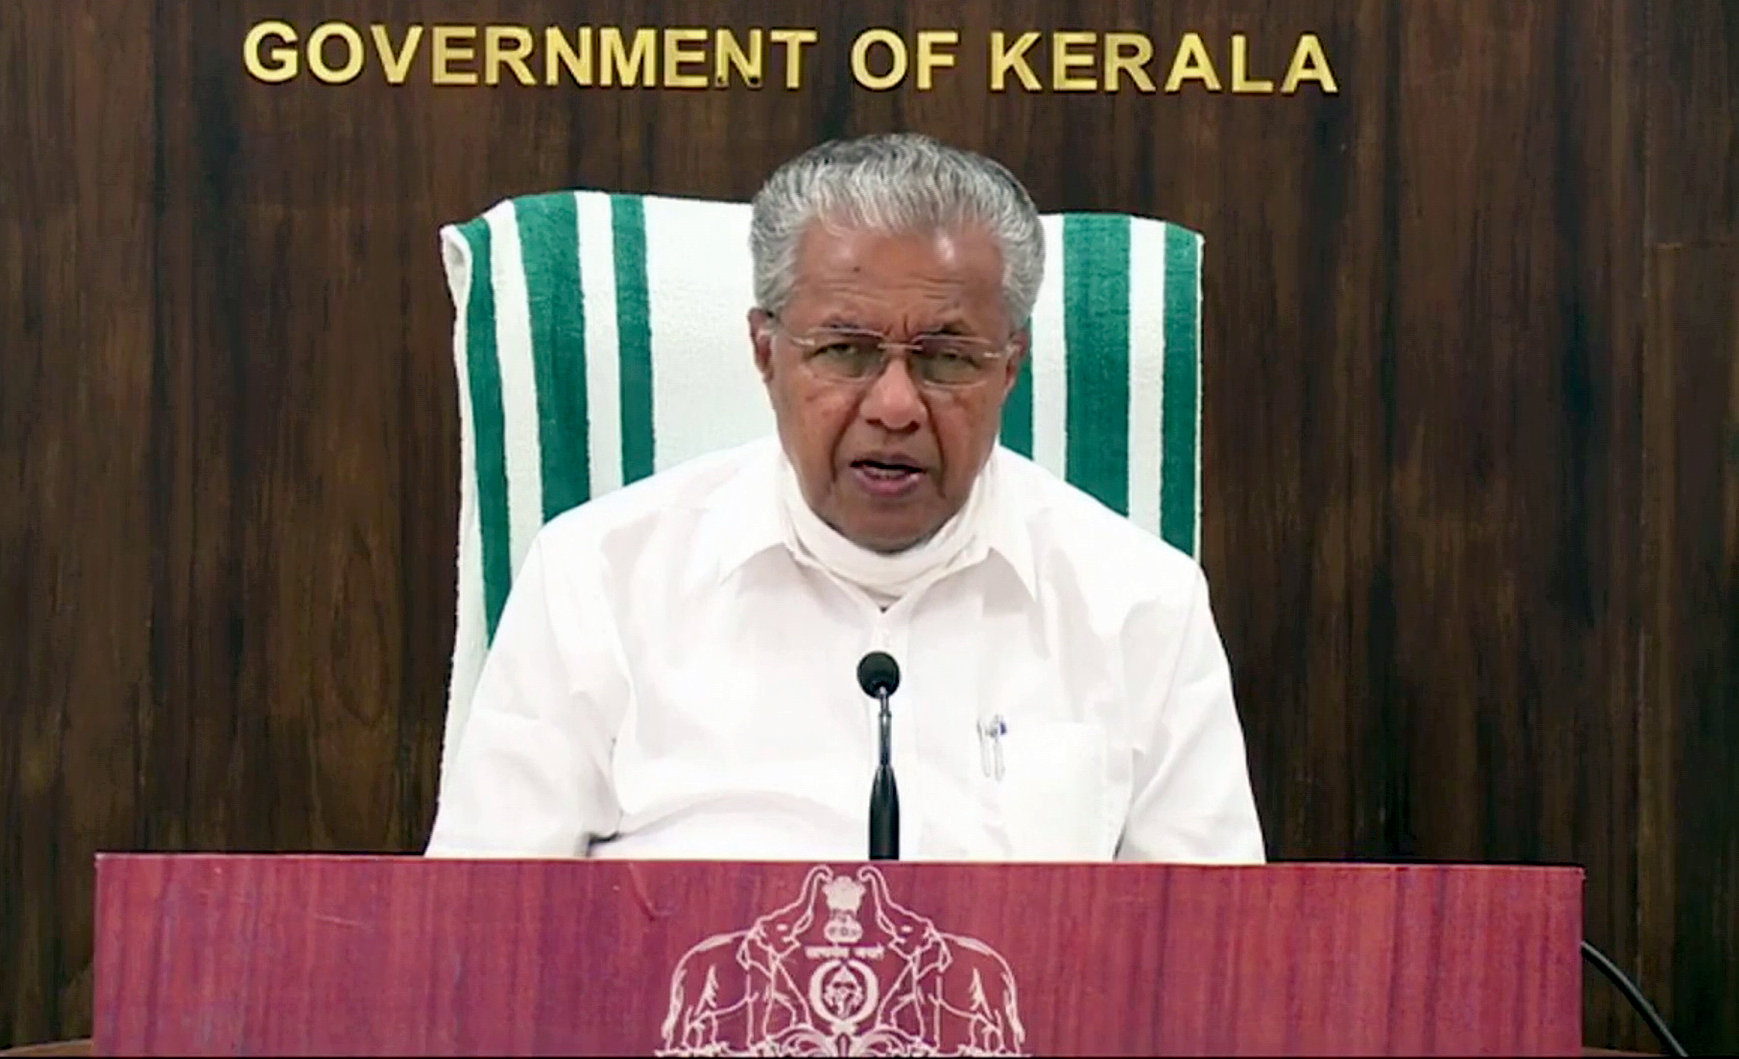 Kerala Assembly Session: CM Vijayan to introduce a resolution against Uniform Civil Code in Assembly